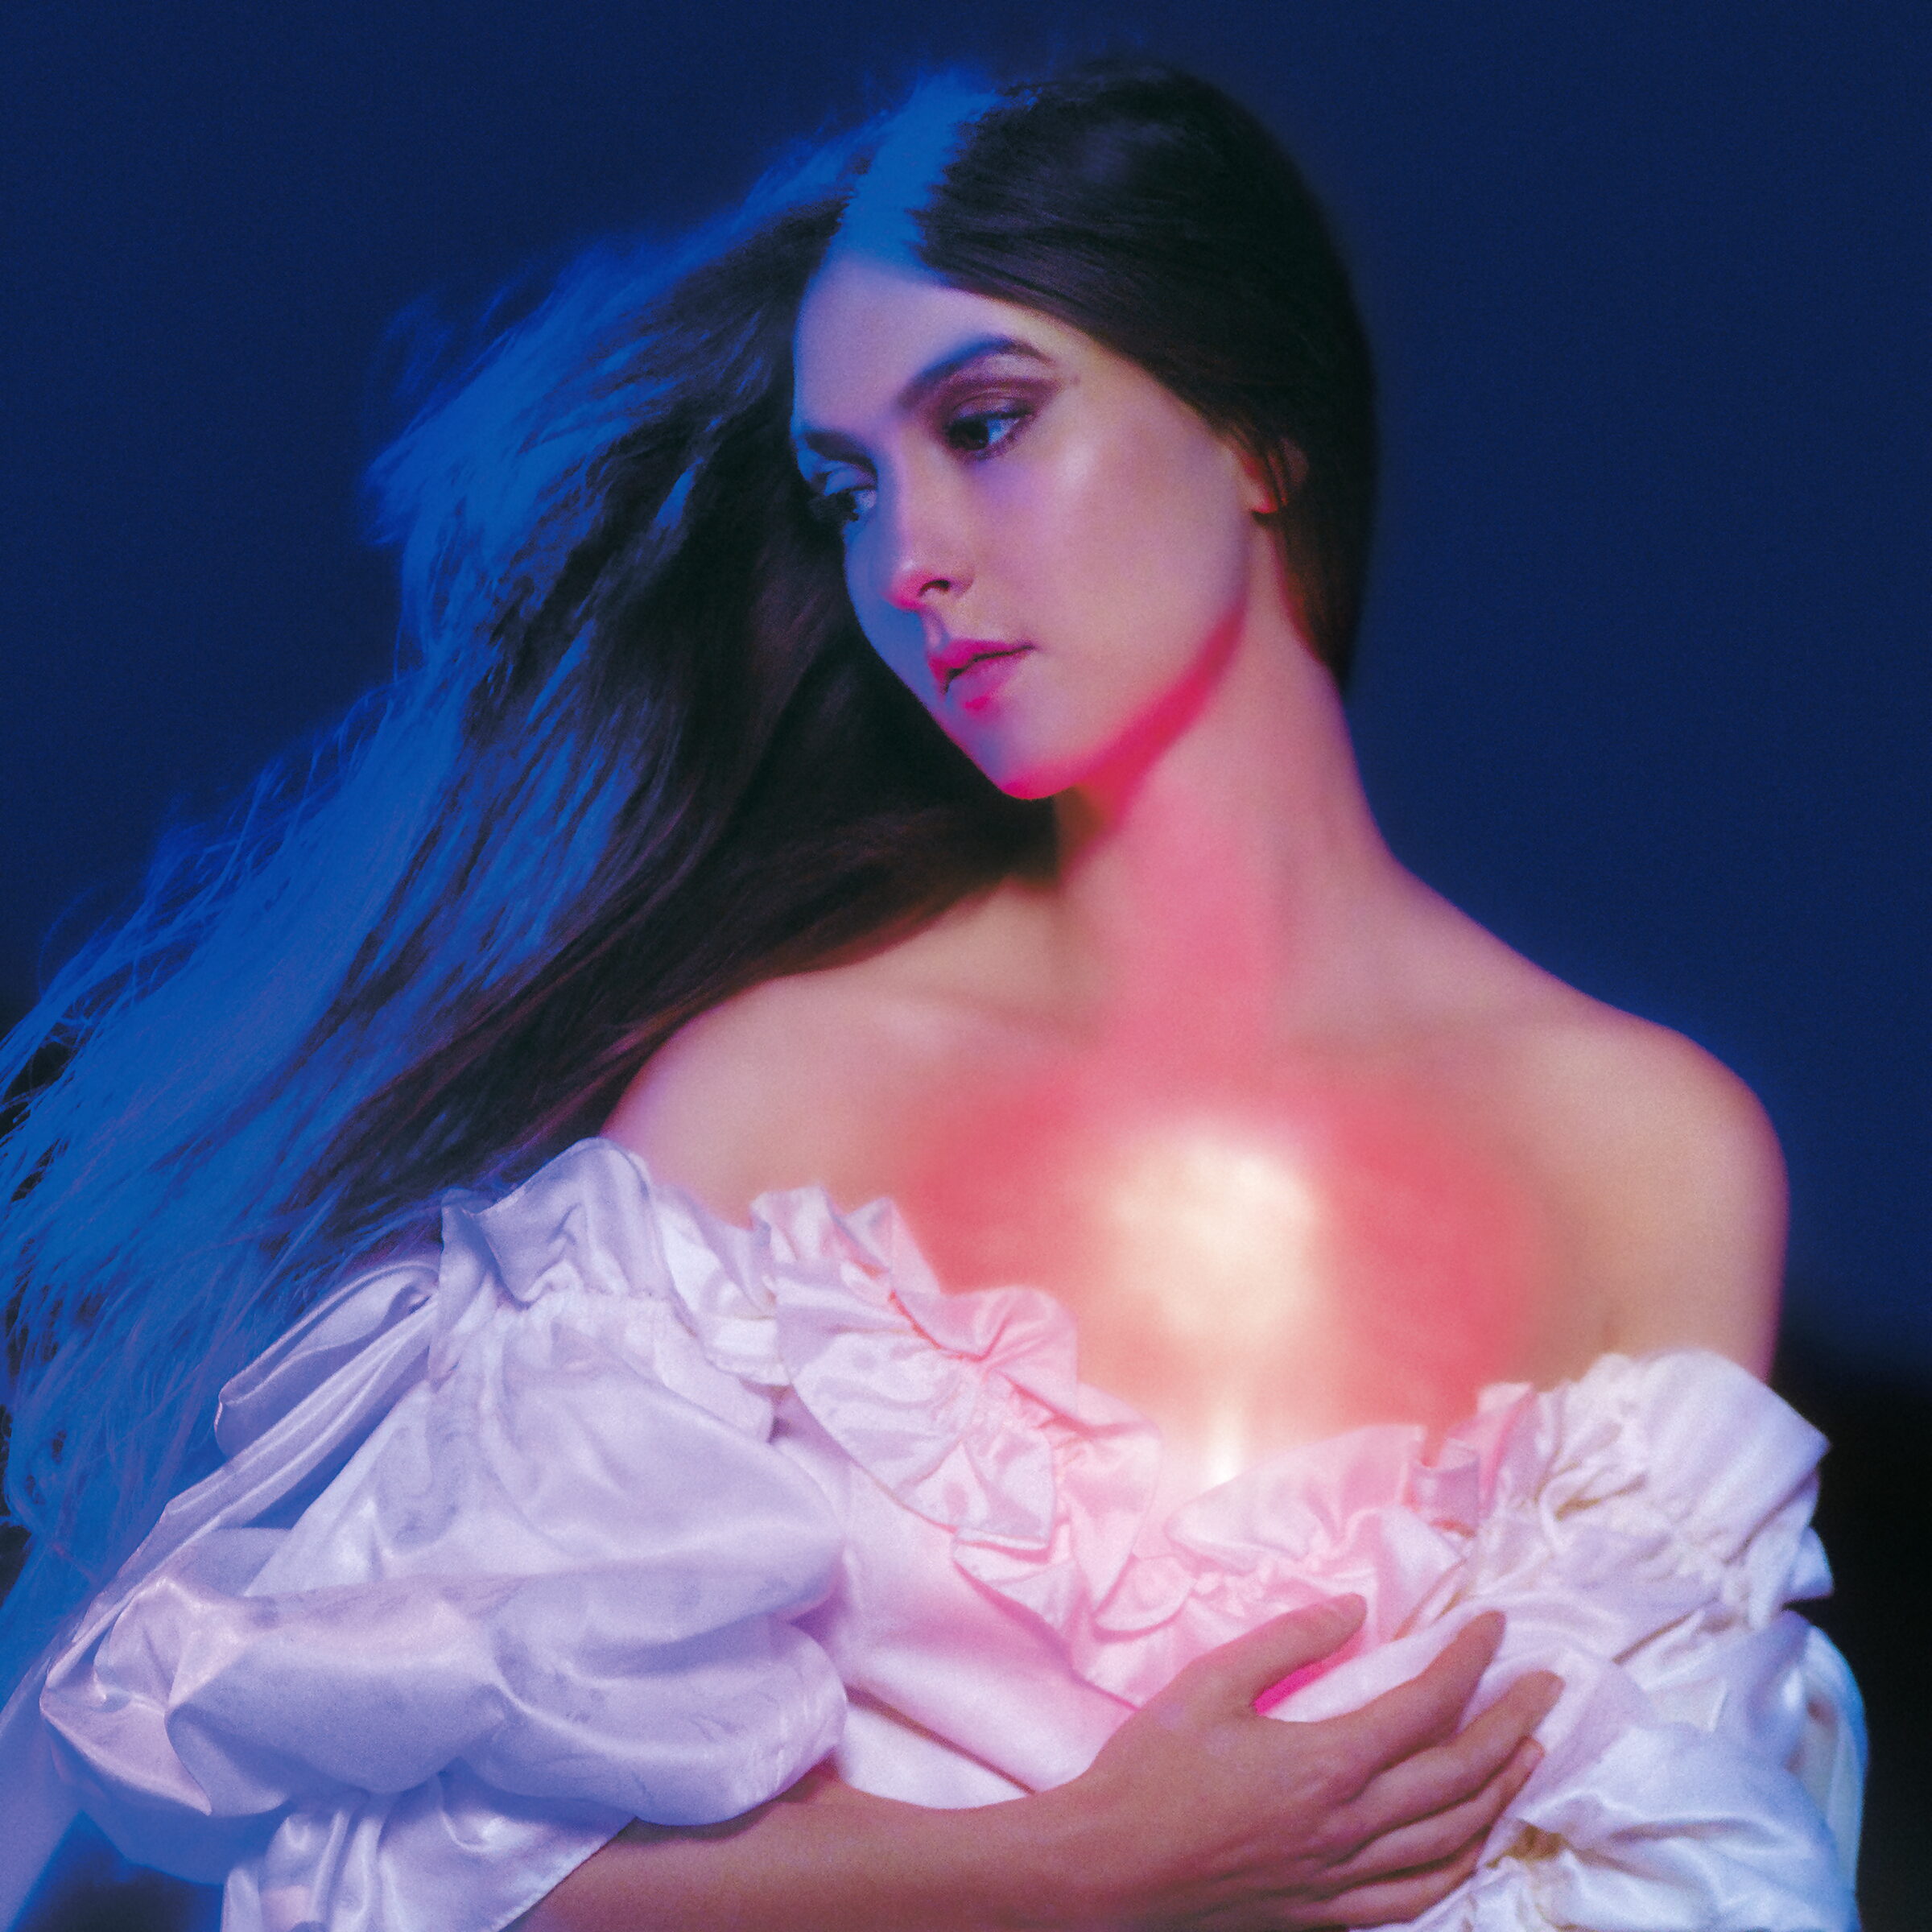 Weyes Blood album cover and in the darkness